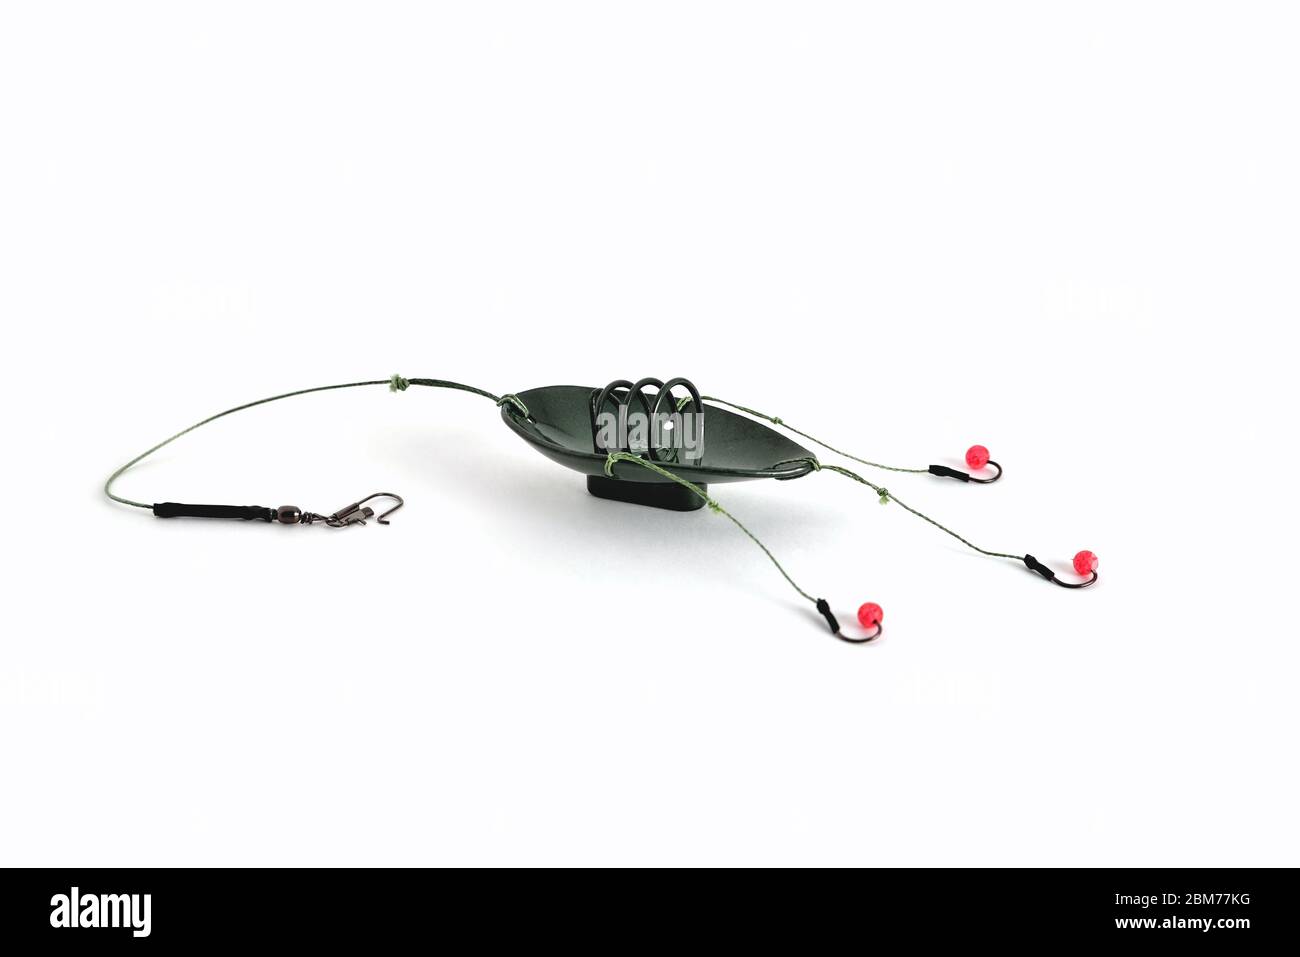 fishing trough spoon, fishing hooks and fishing line, accessories for bottom  fishing on a white background close-up Stock Photo - Alamy